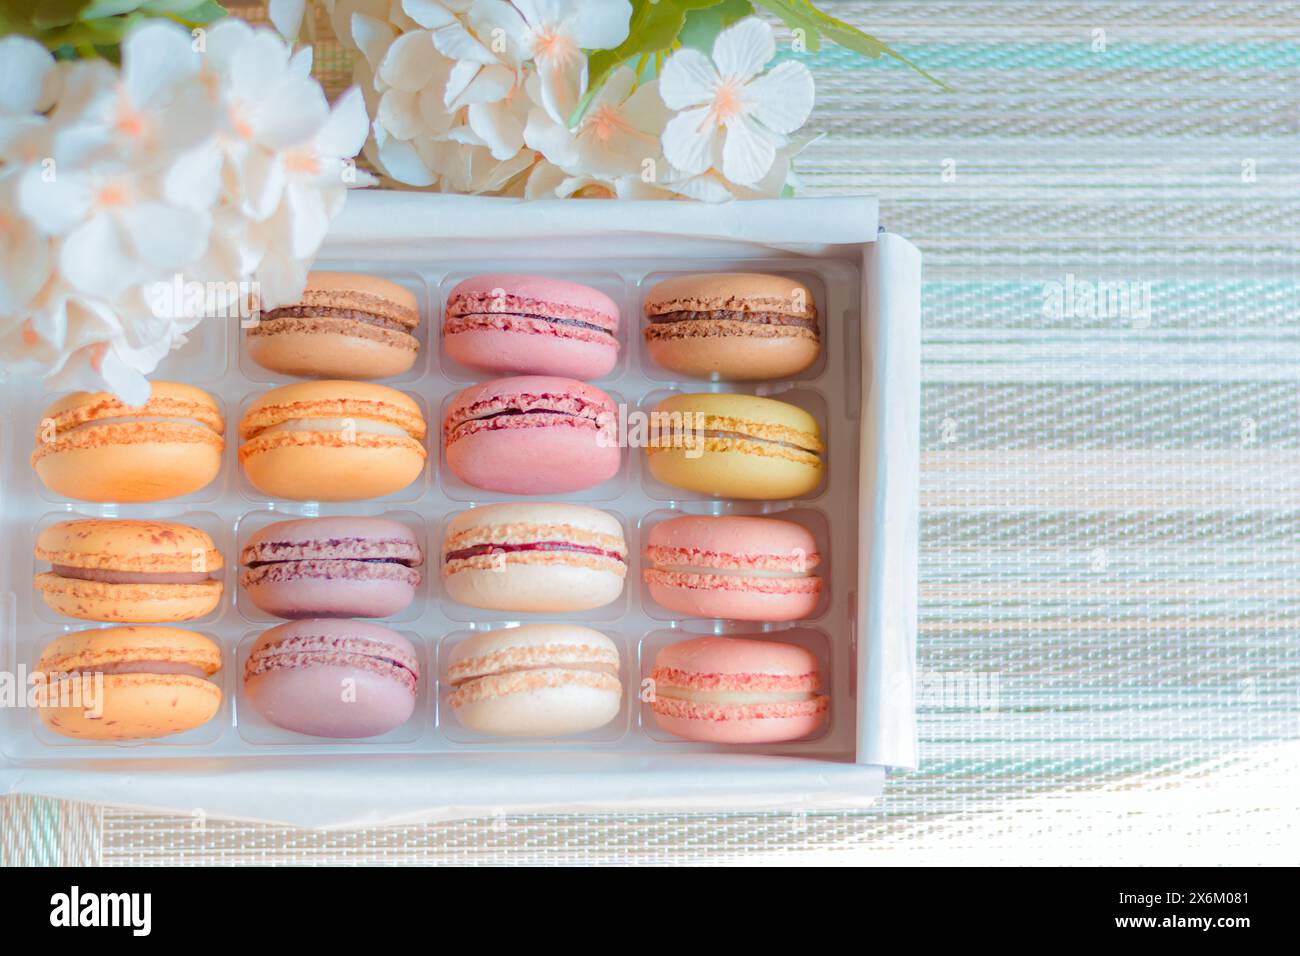 Homemade macaroon of different flavors, with a nice and colorful background, gourmet presentation. Stock Photo